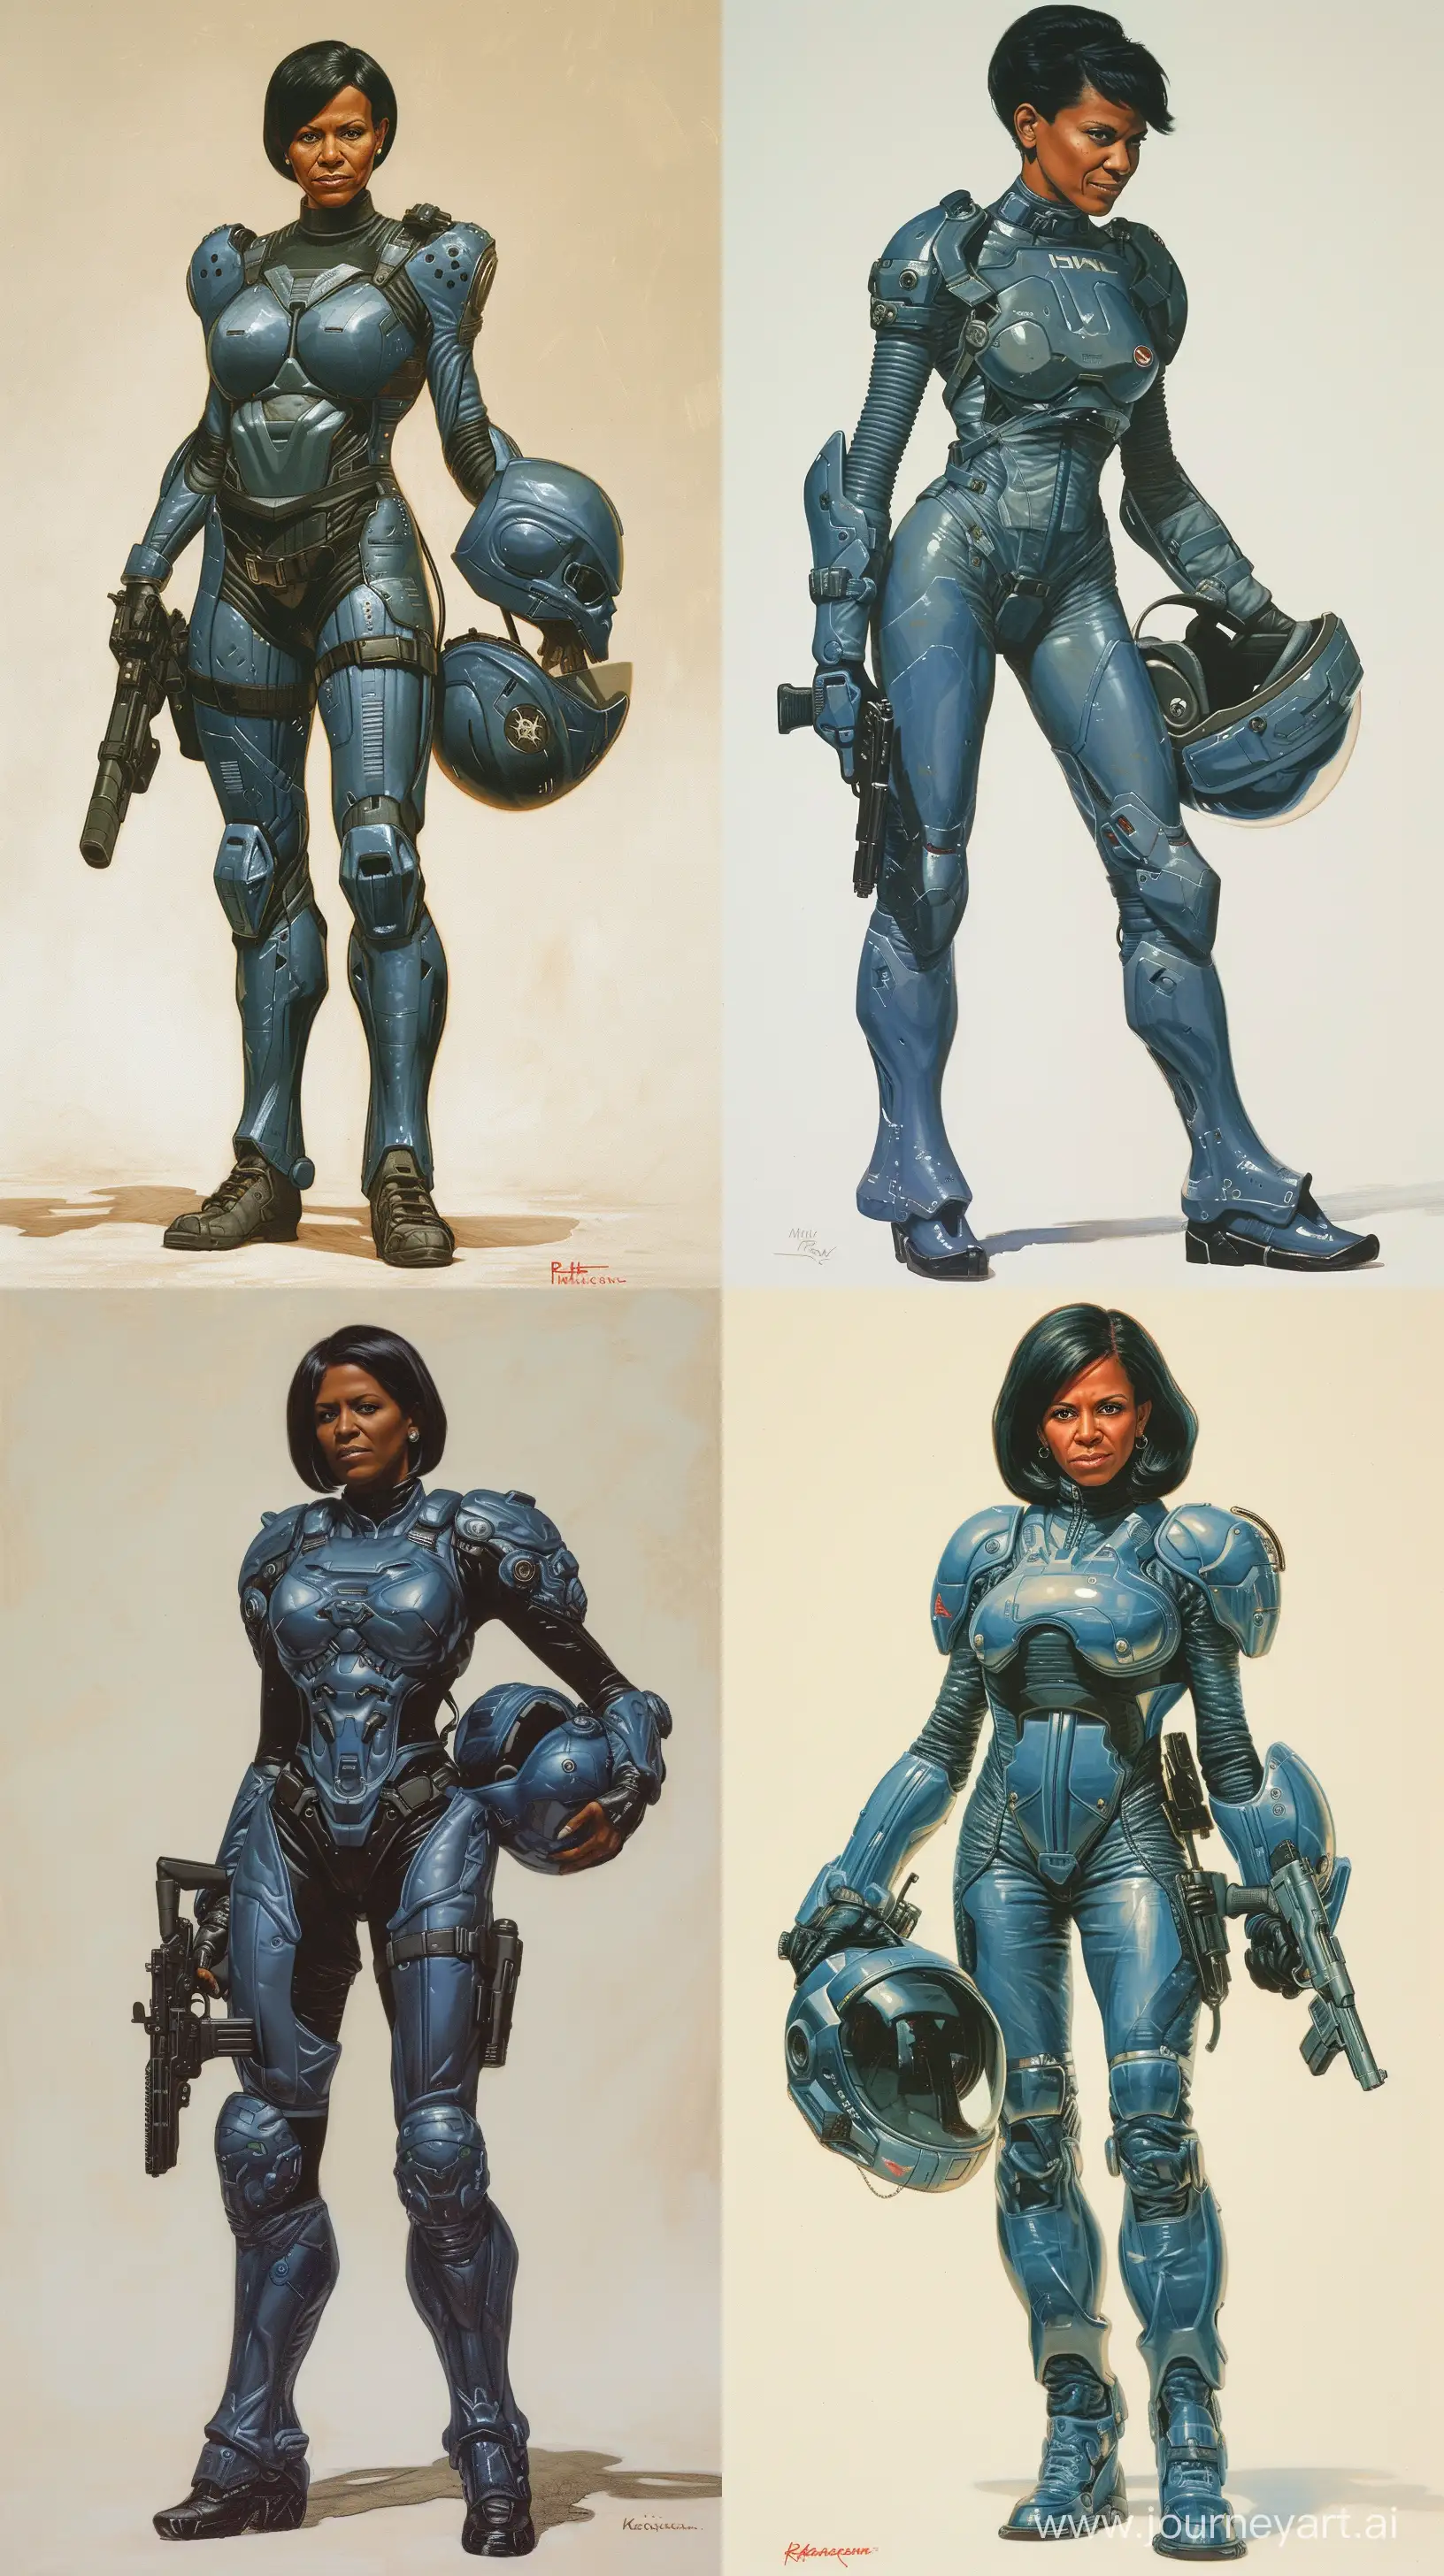 A tall version of Michelle Obama with a black pixie cut wearing a suit of smooth futuristic blue plated armor and holding a futuristic gun and holding her helmet under her arm painted by Ralph McQuarrie. entire body shown. feet shown. in retro science fiction style. --ar 9:16



